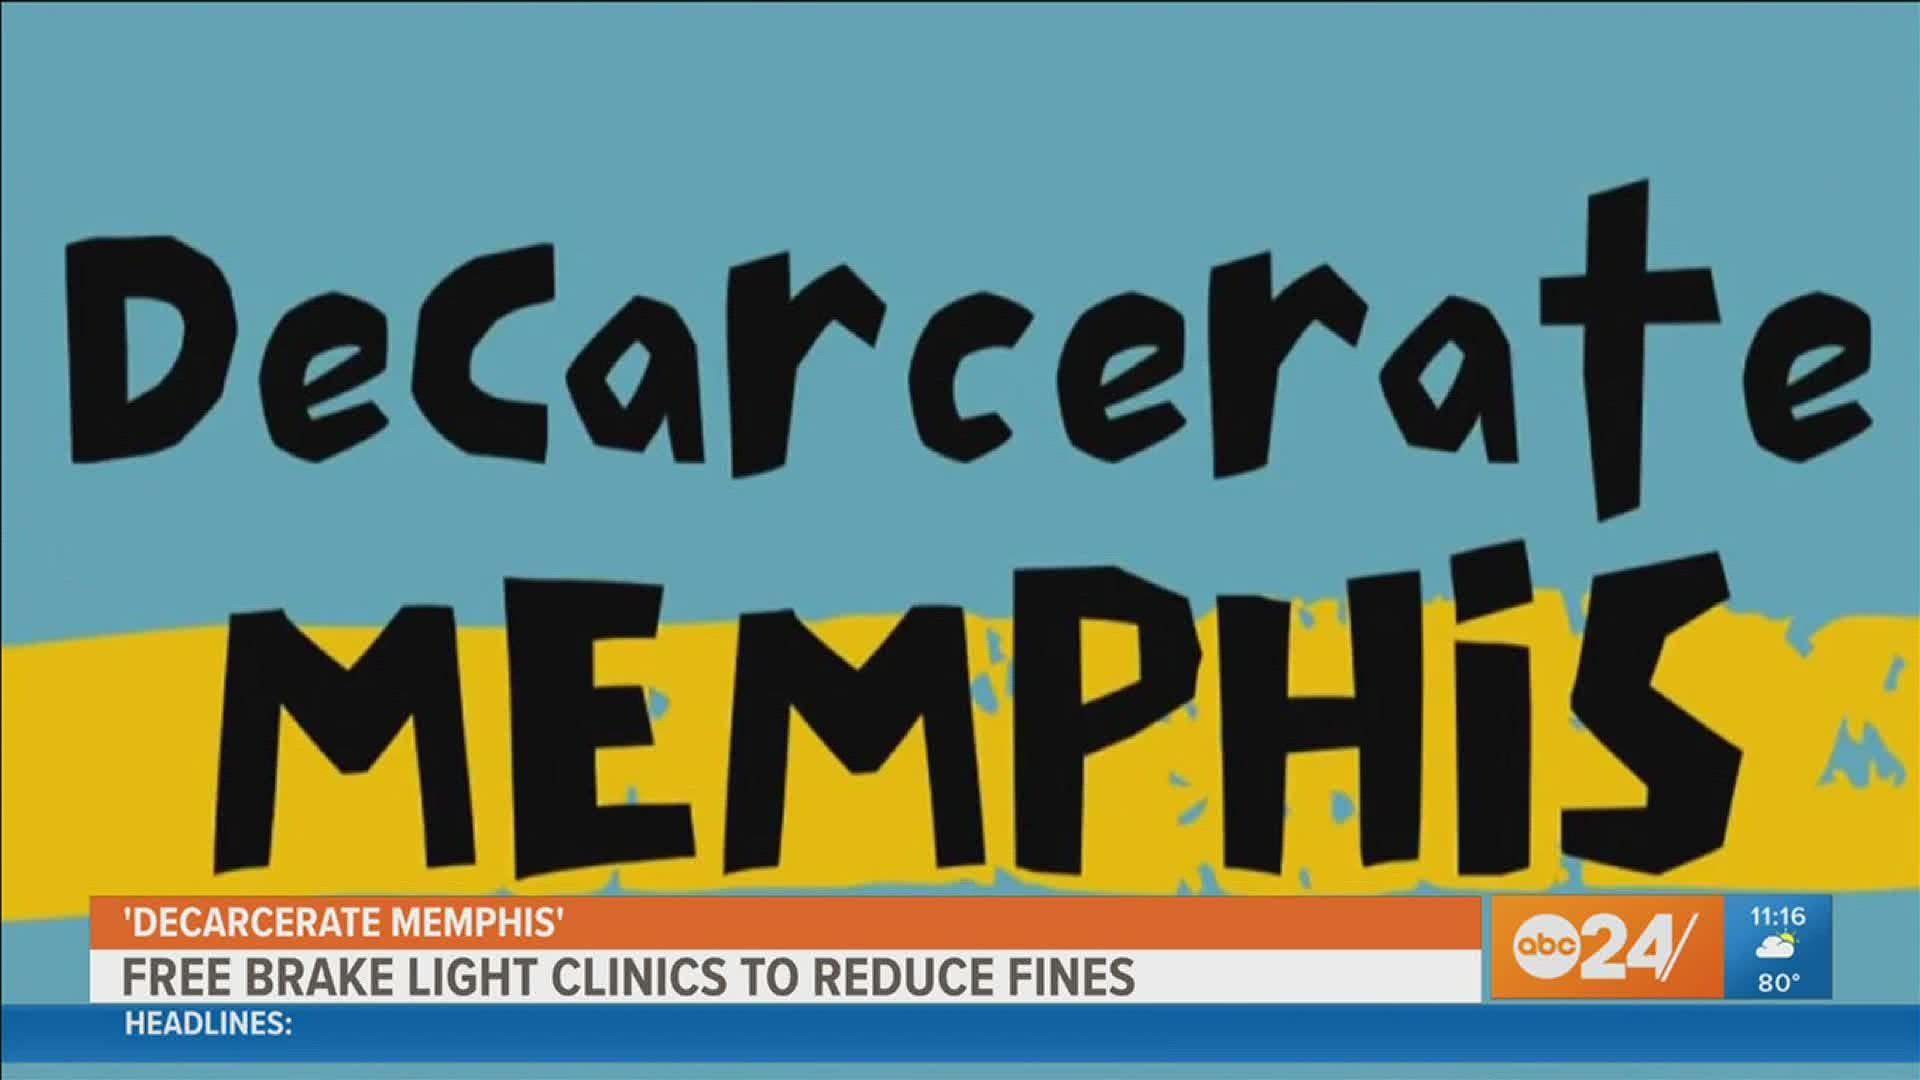 Decarcerate Memphis is hosting its first brake light clinic on Saturday, Oct. 16, from 10 a.m. to 2 p.m. at Douglass Park.